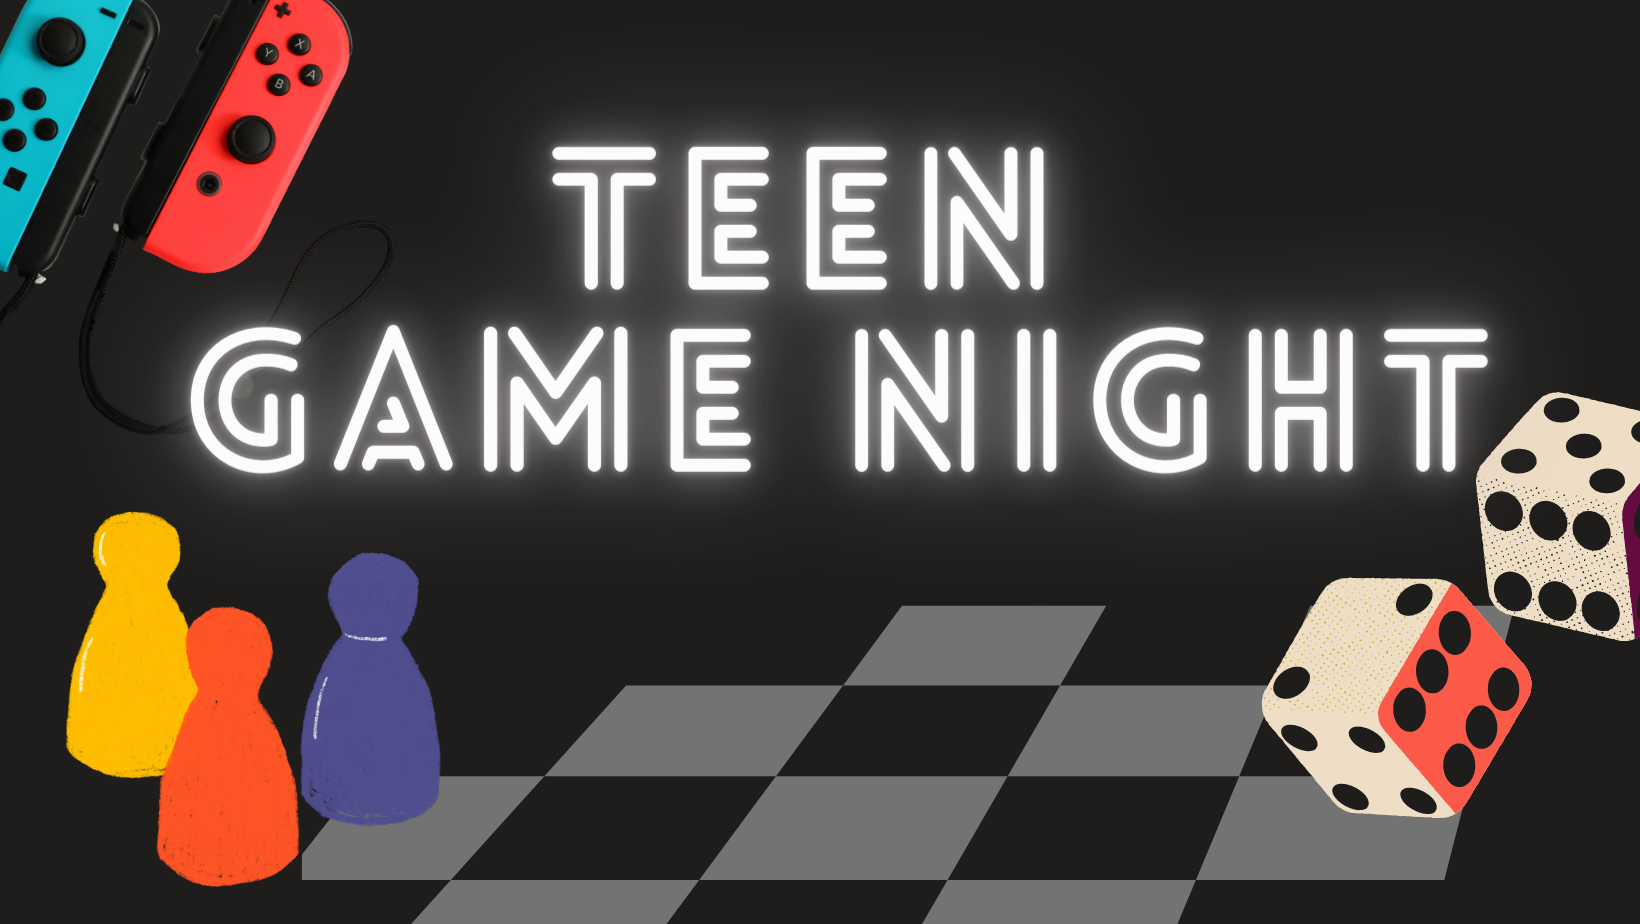 Teen Game Night, checkers, dice, video game controllers